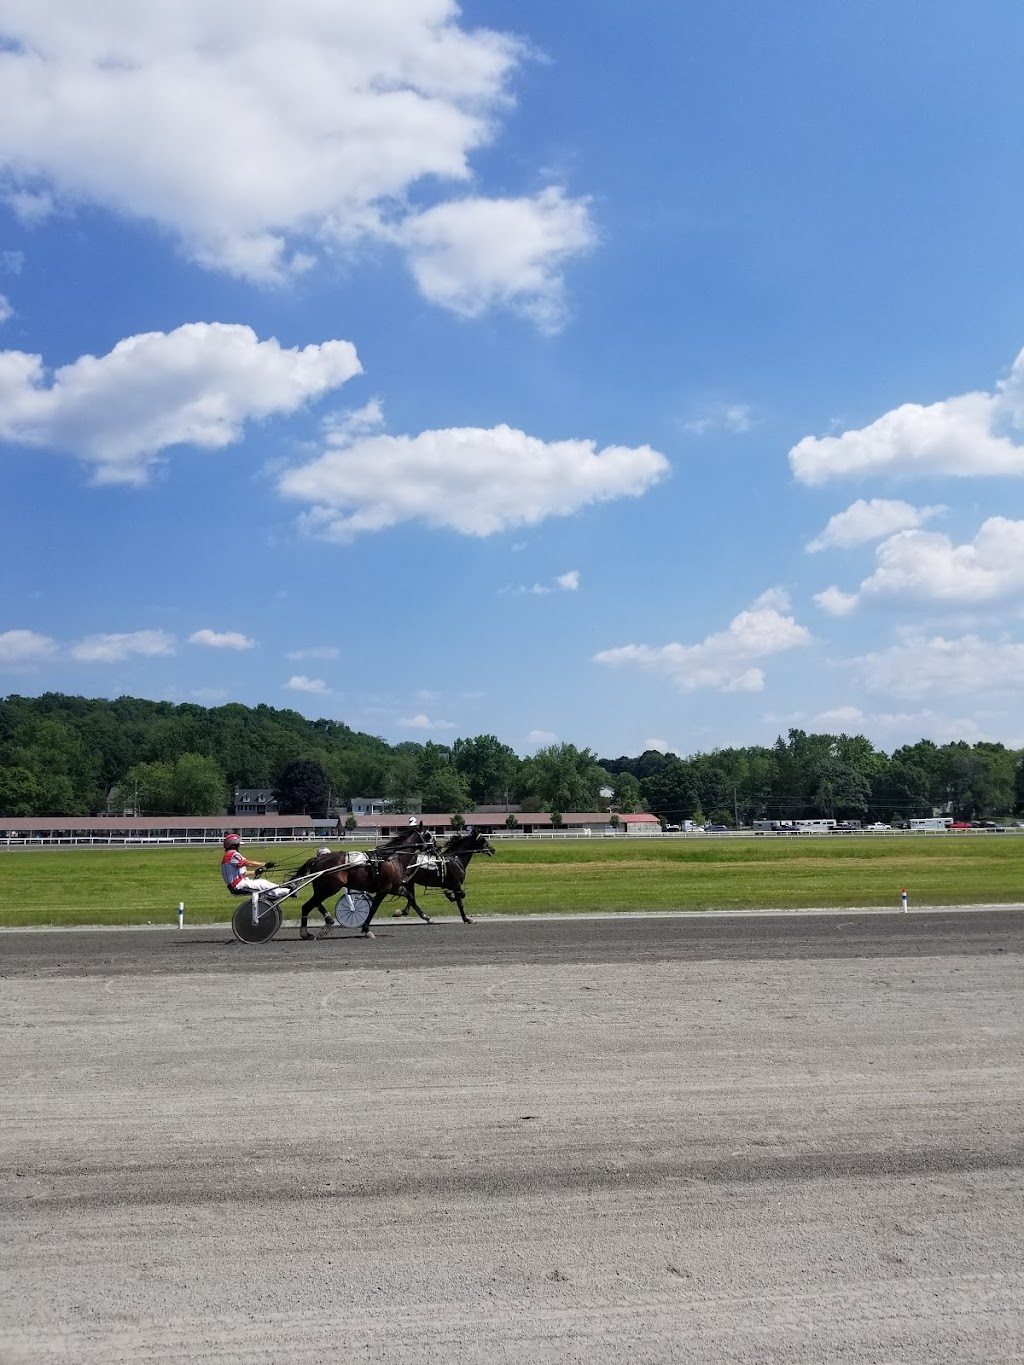 Harness Racing Museum & Hall Of Fame | 240 Main St, Goshen, NY 10924 | Phone: (845) 294-6330